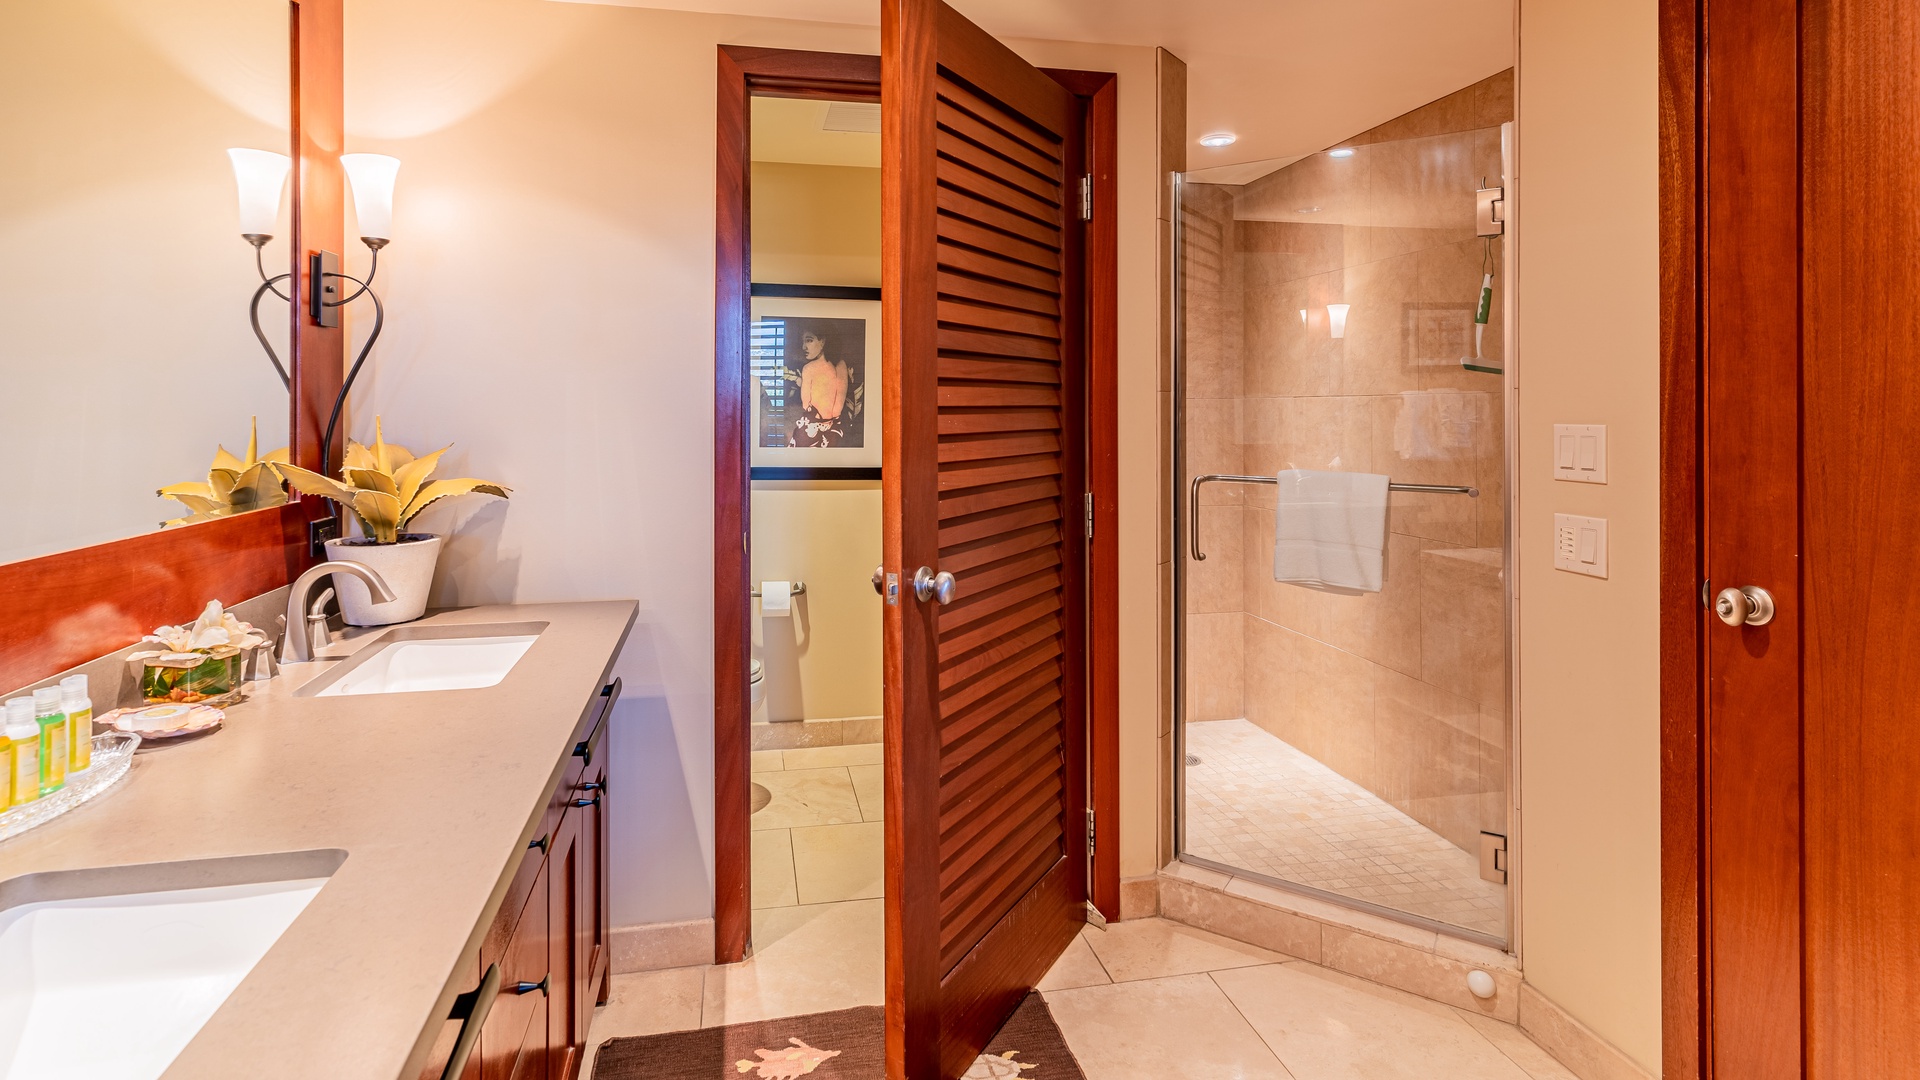 Kapolei Vacation Rentals, Ko Olina Beach Villas O704 - The primary guest bathroom has a walk-in shower and double vanity.